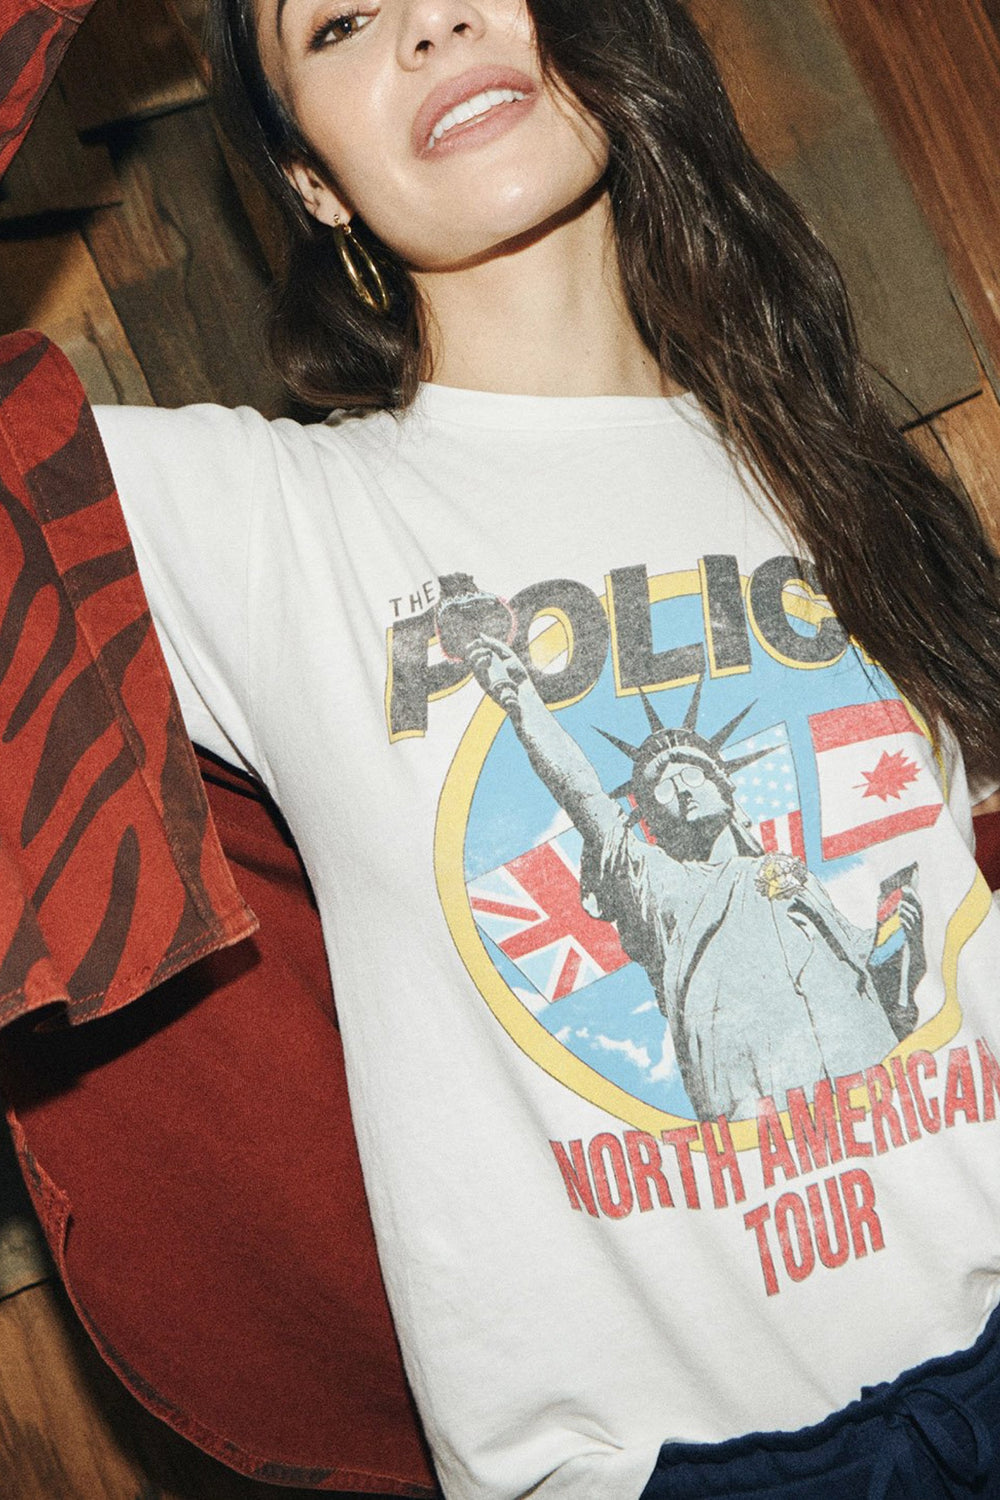 Police North American Tour Tee